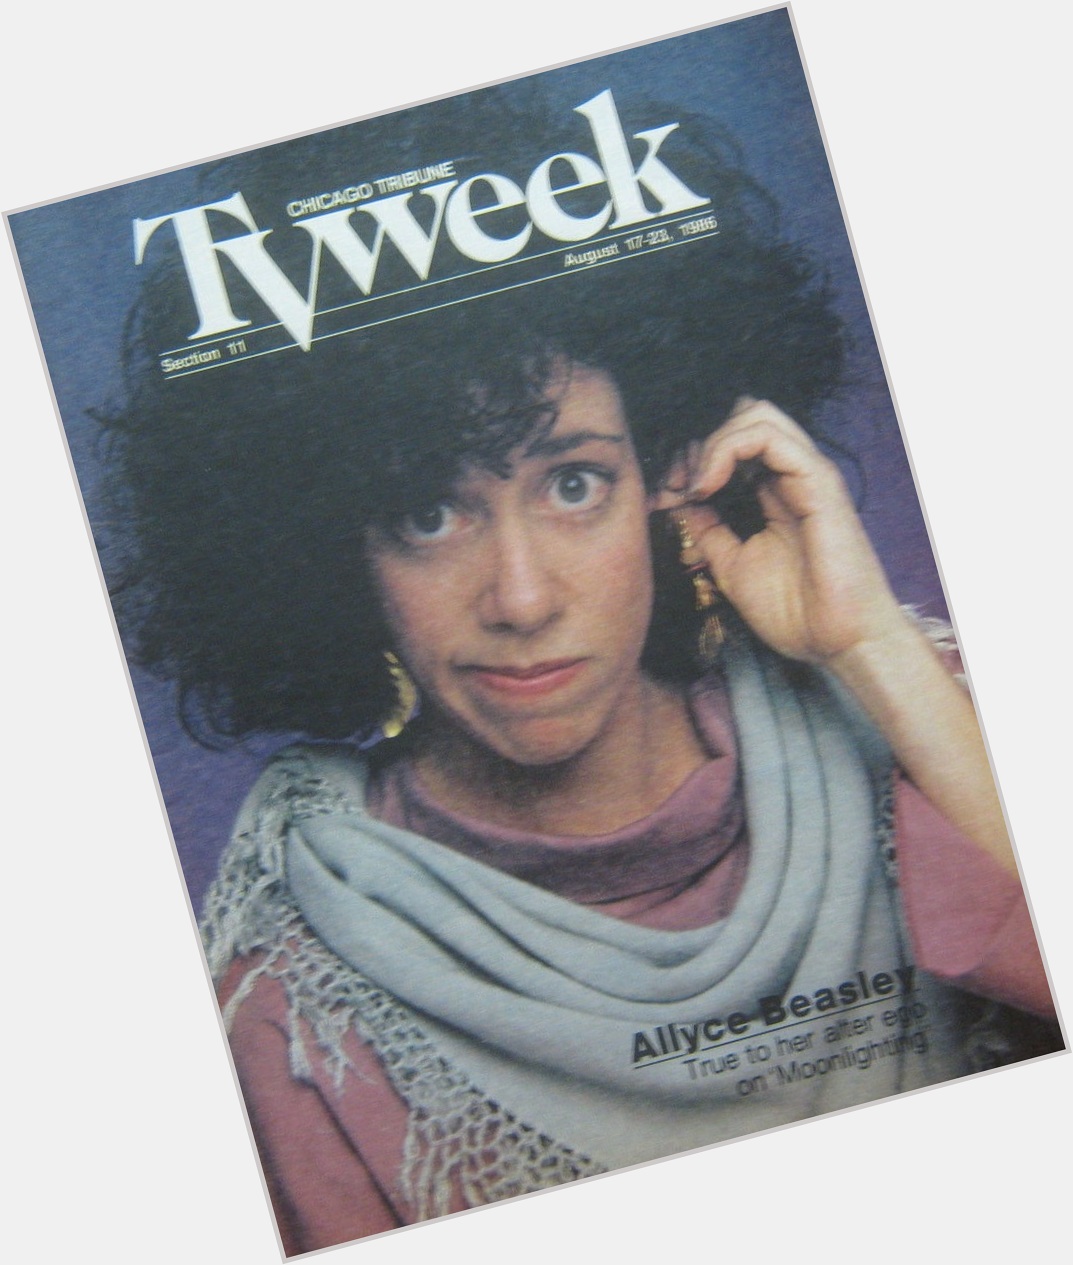 Happy Birthday to Allyce Beasley, born on this day in 1952.
Chicago Tribune TV Week.  August 17-23, 1986 